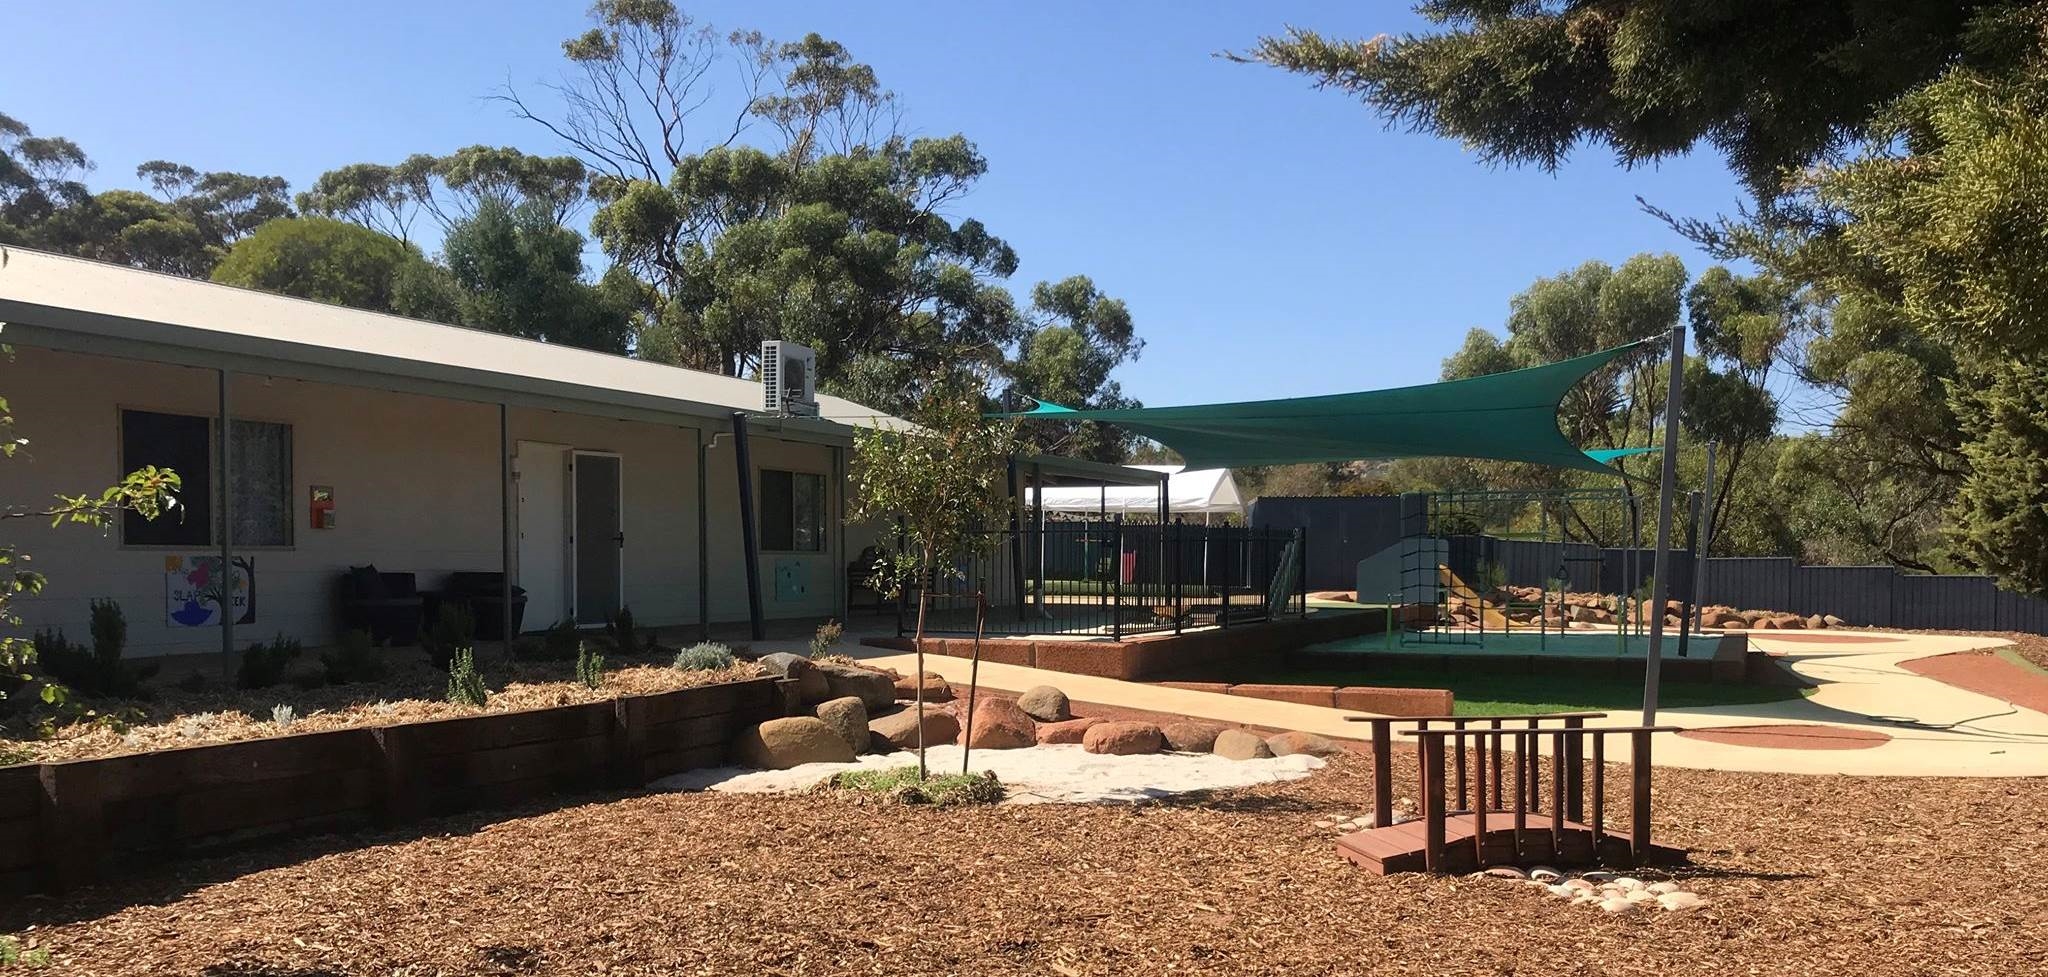 Toodyay Early Learning Centre